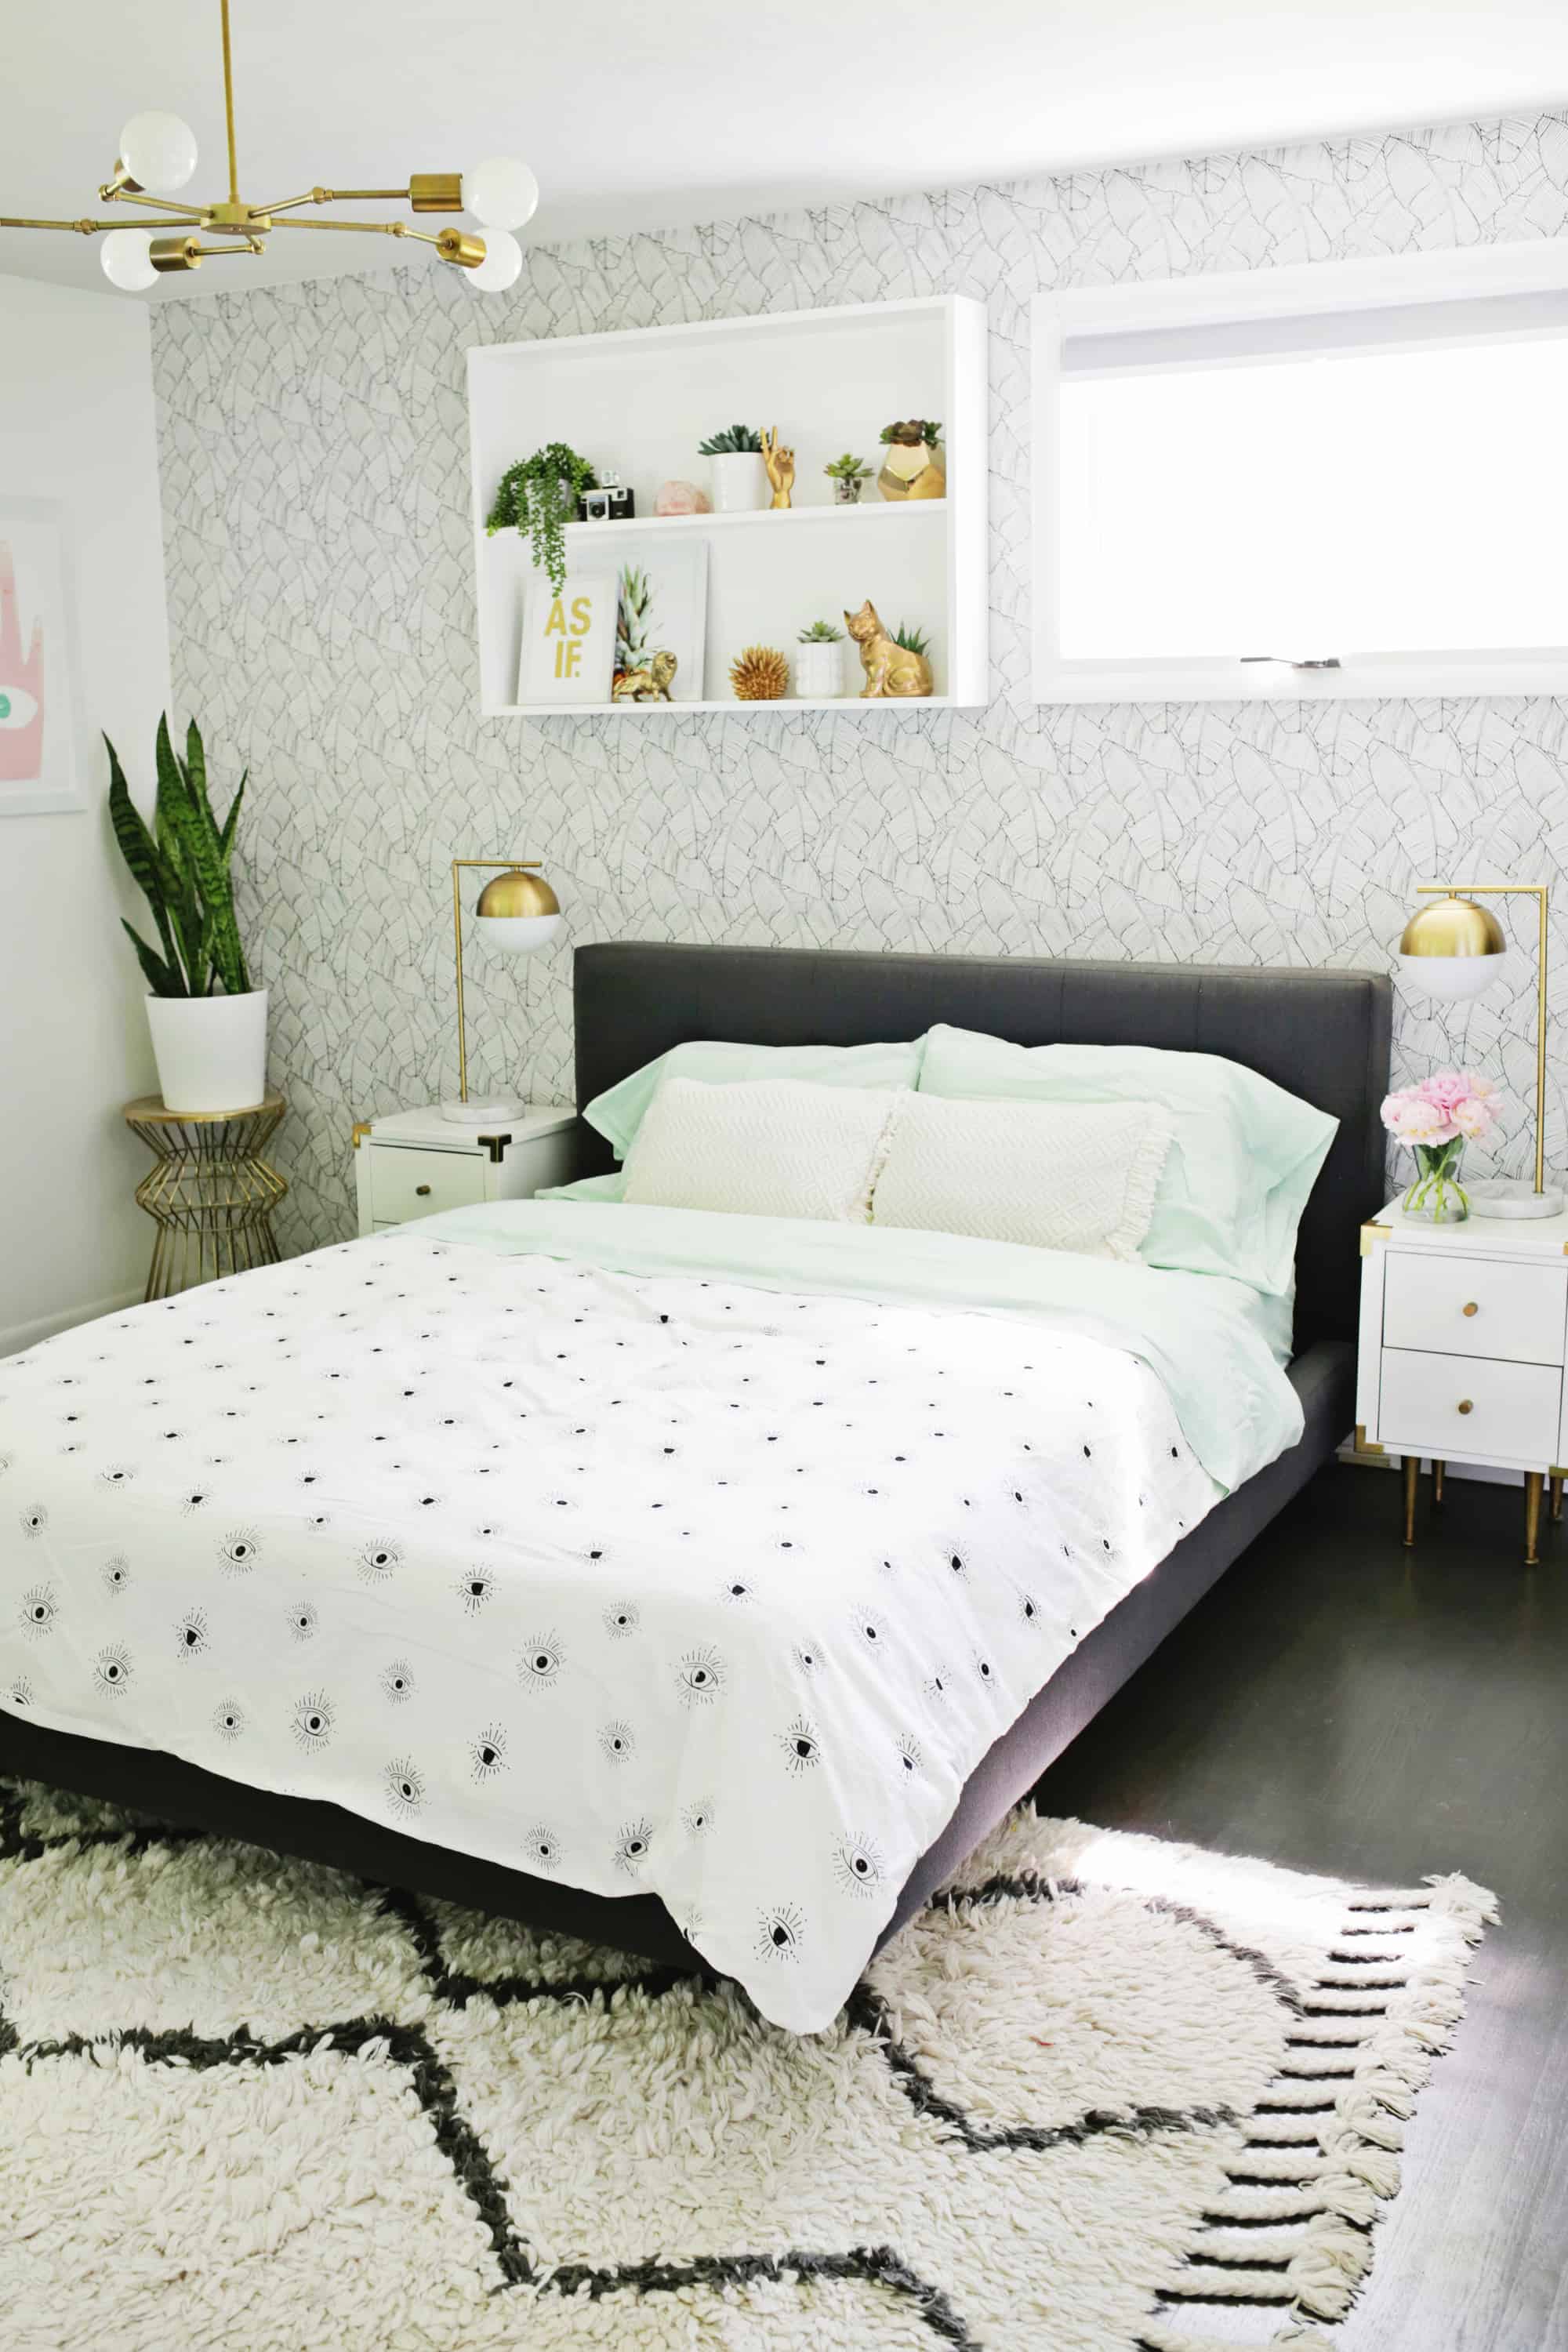 Easy Duvet Cover With Any Flat Sheet, Queen Size Duvet Cover Pattern